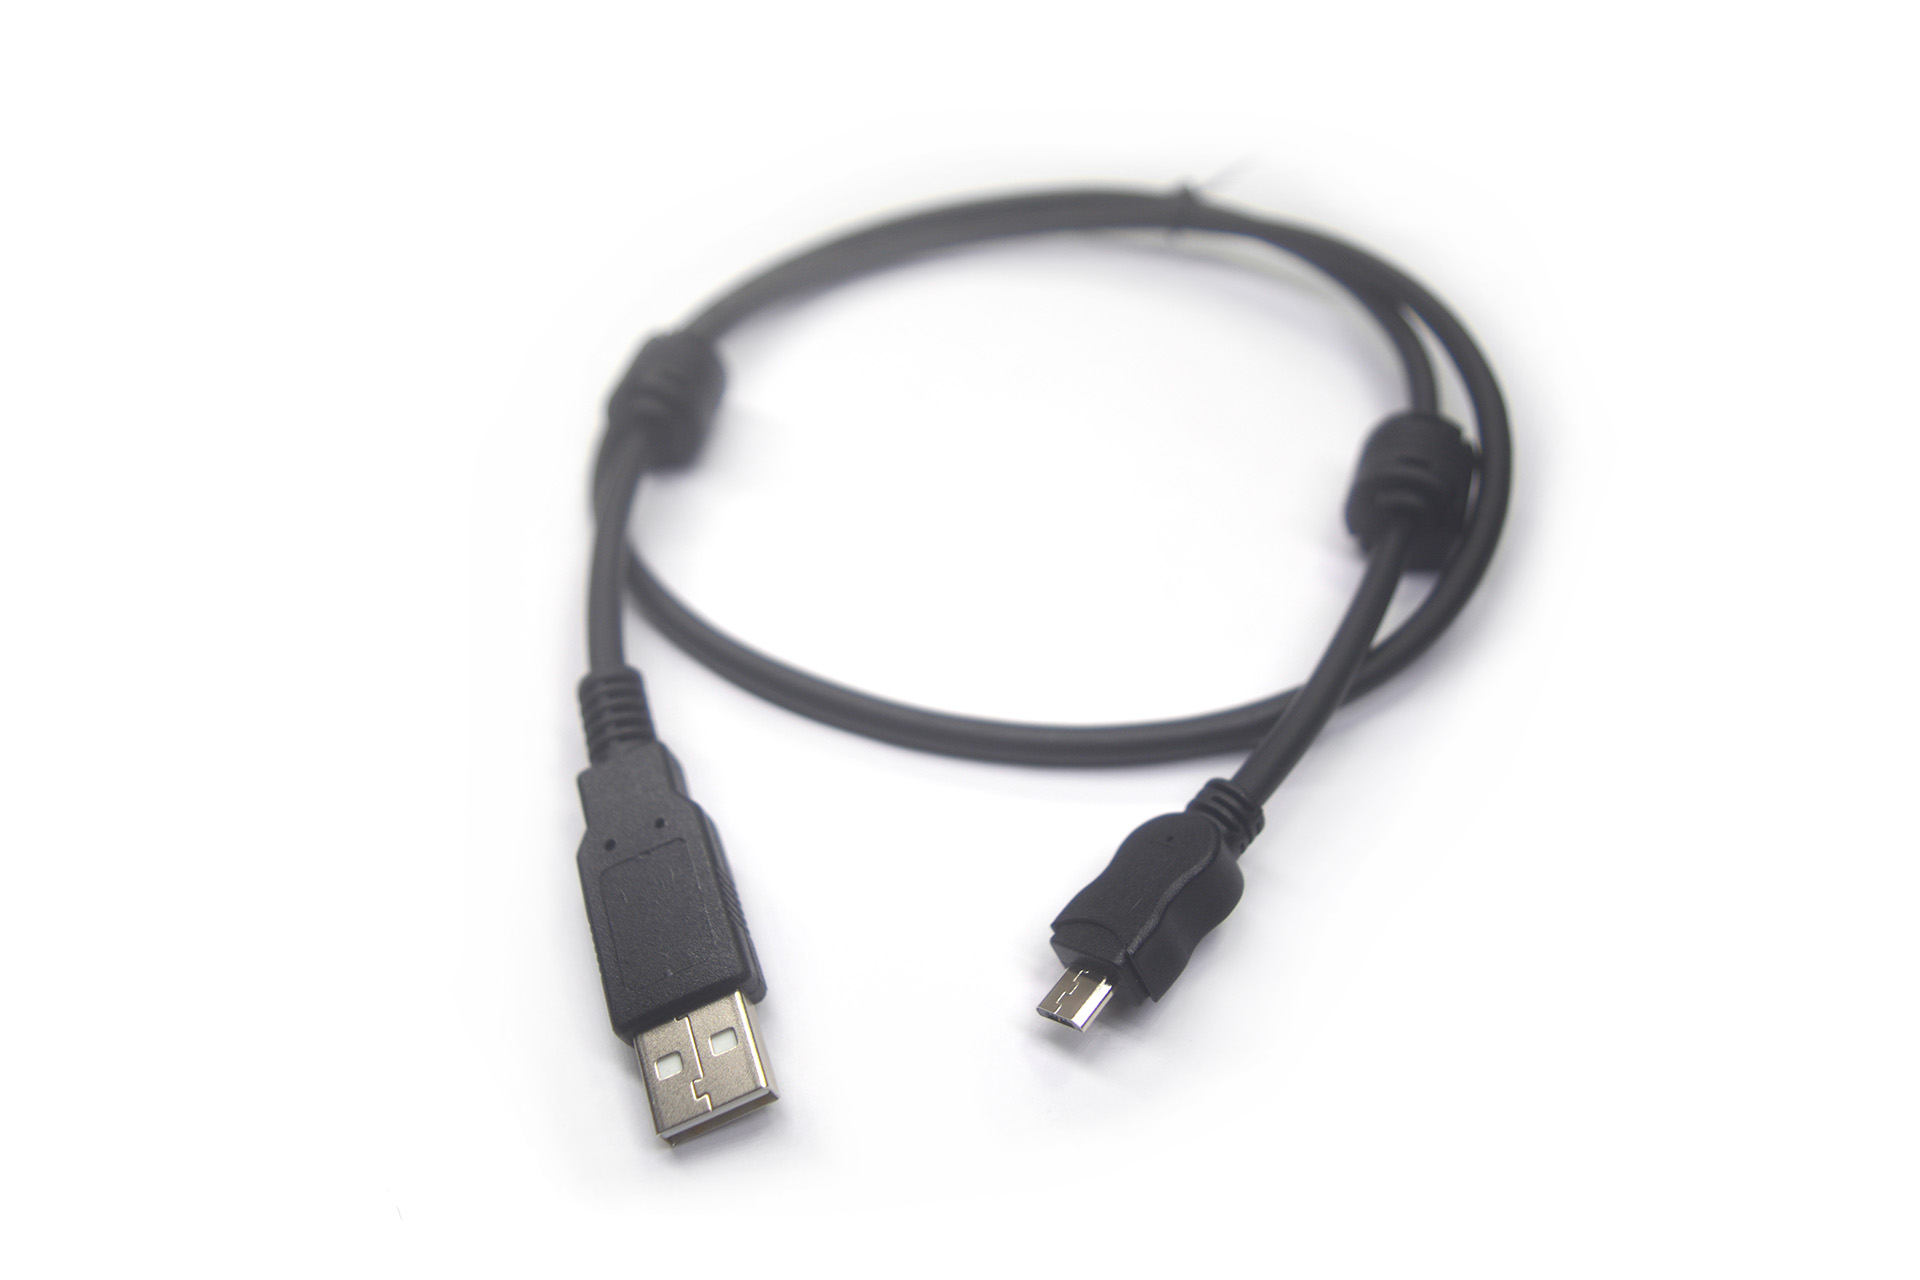 USB2.0 A to micro-B cable